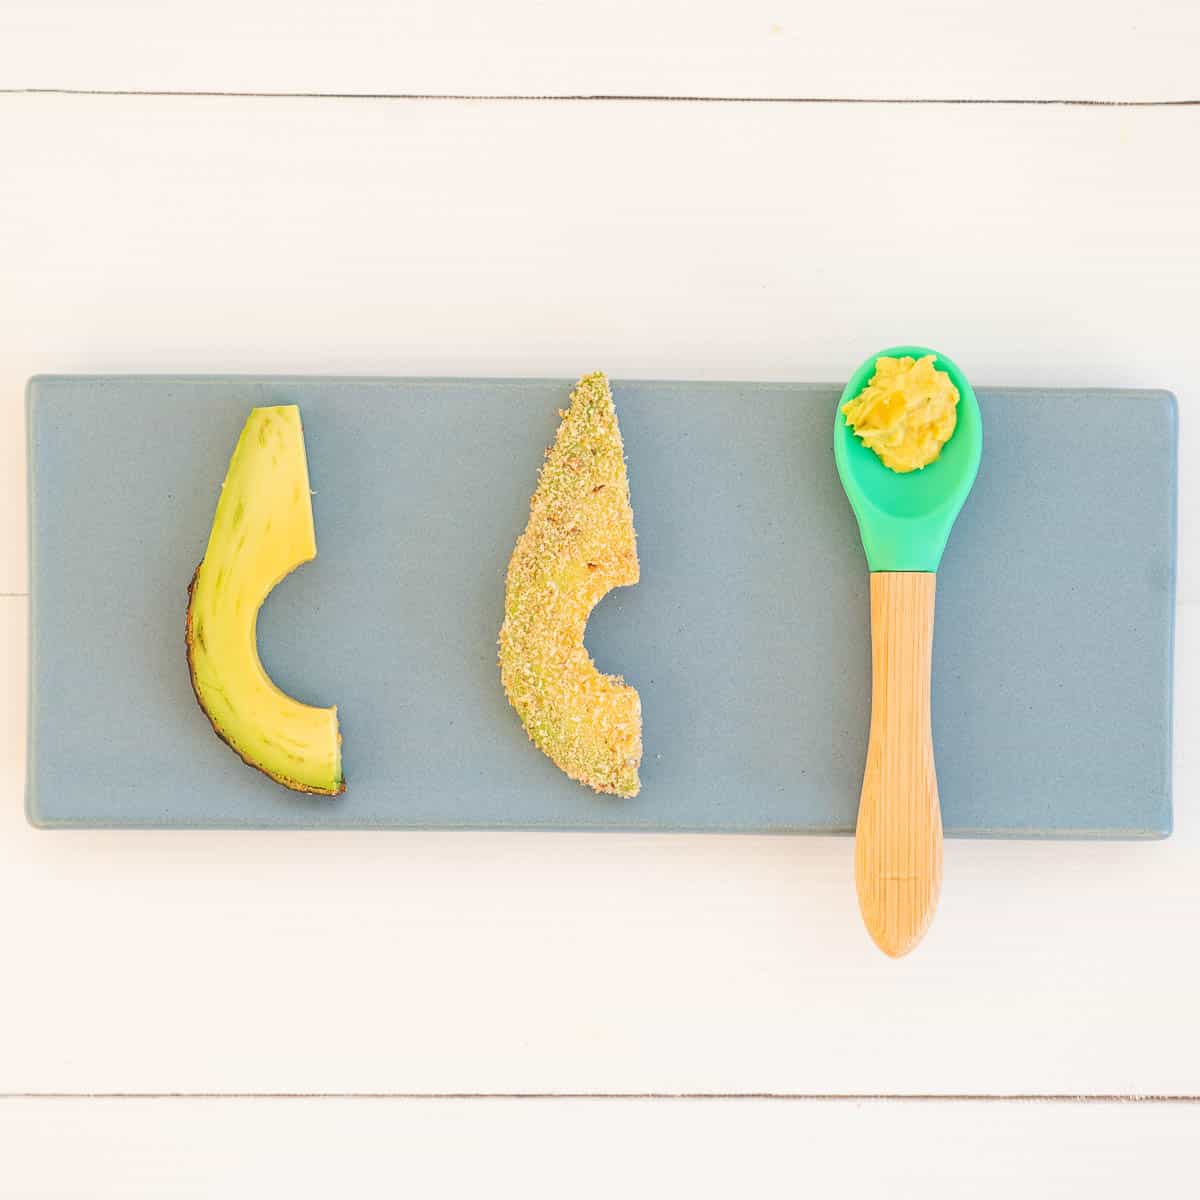 Avocado slice with half skin in place, crumbed avocado slice and avocado baby food pre-loaded on a green silicone baby spoon